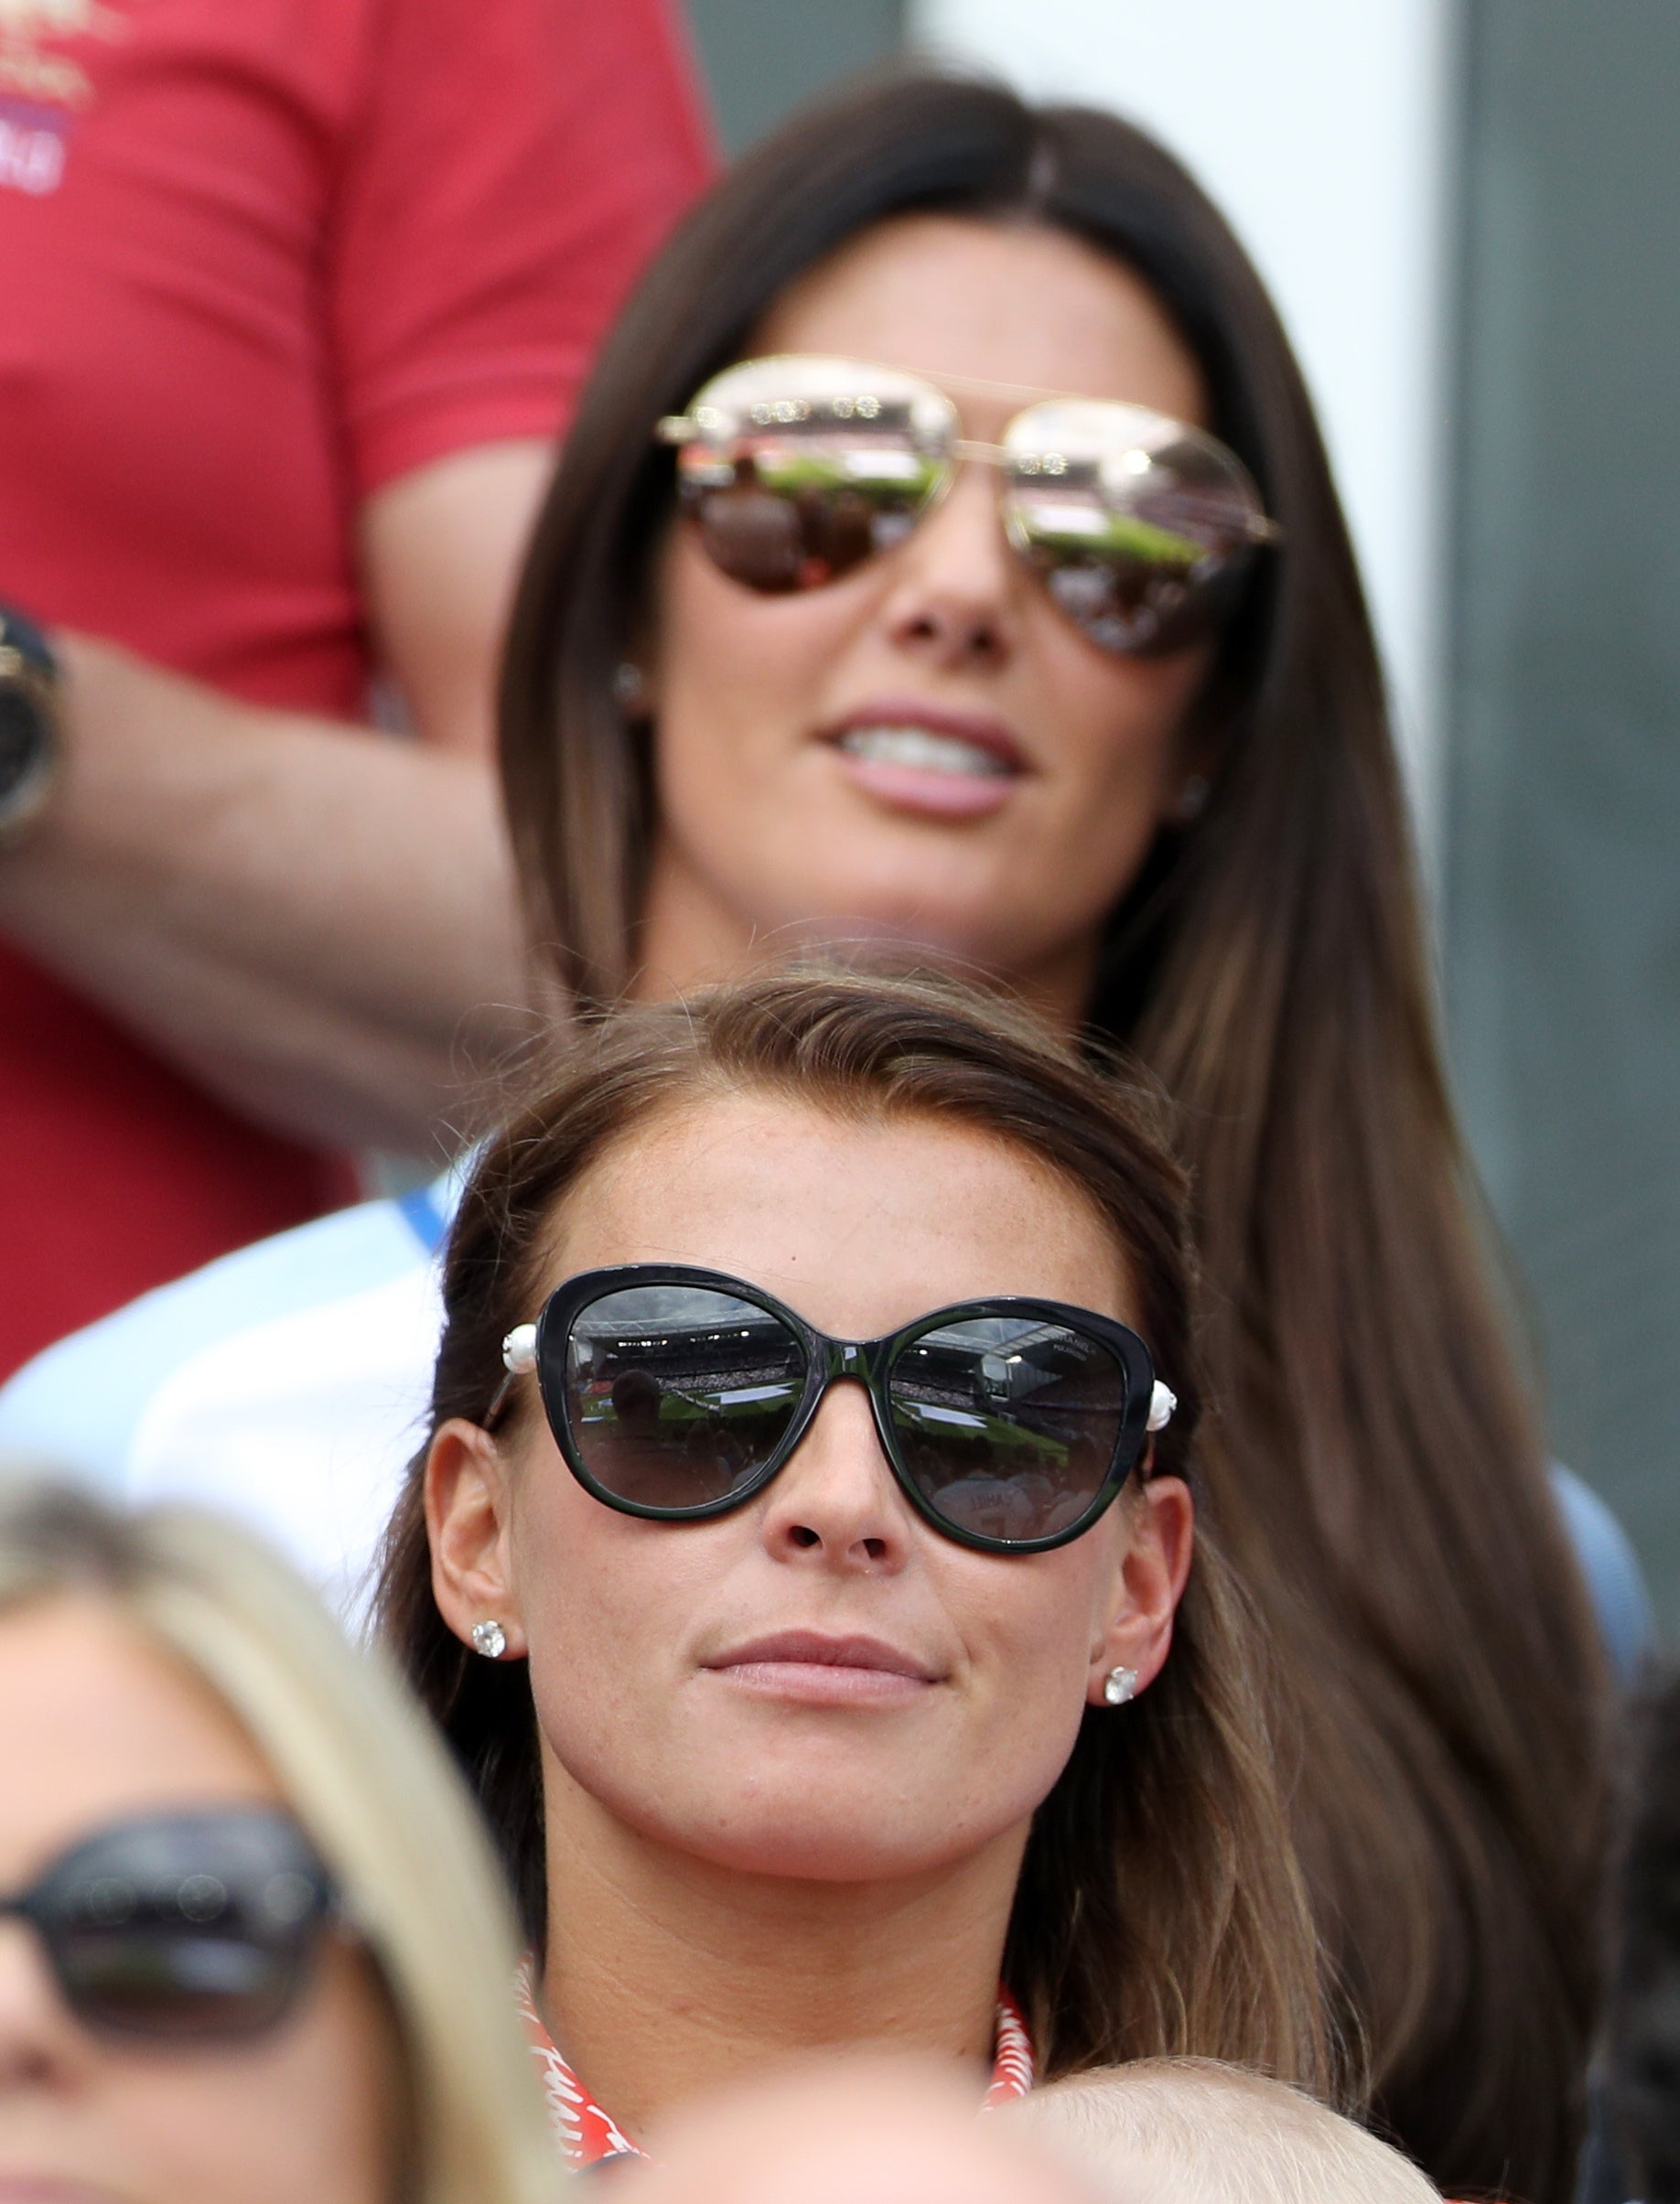 Coleen Rooney and Rebekah Vardy in the stands during the Euro 2016